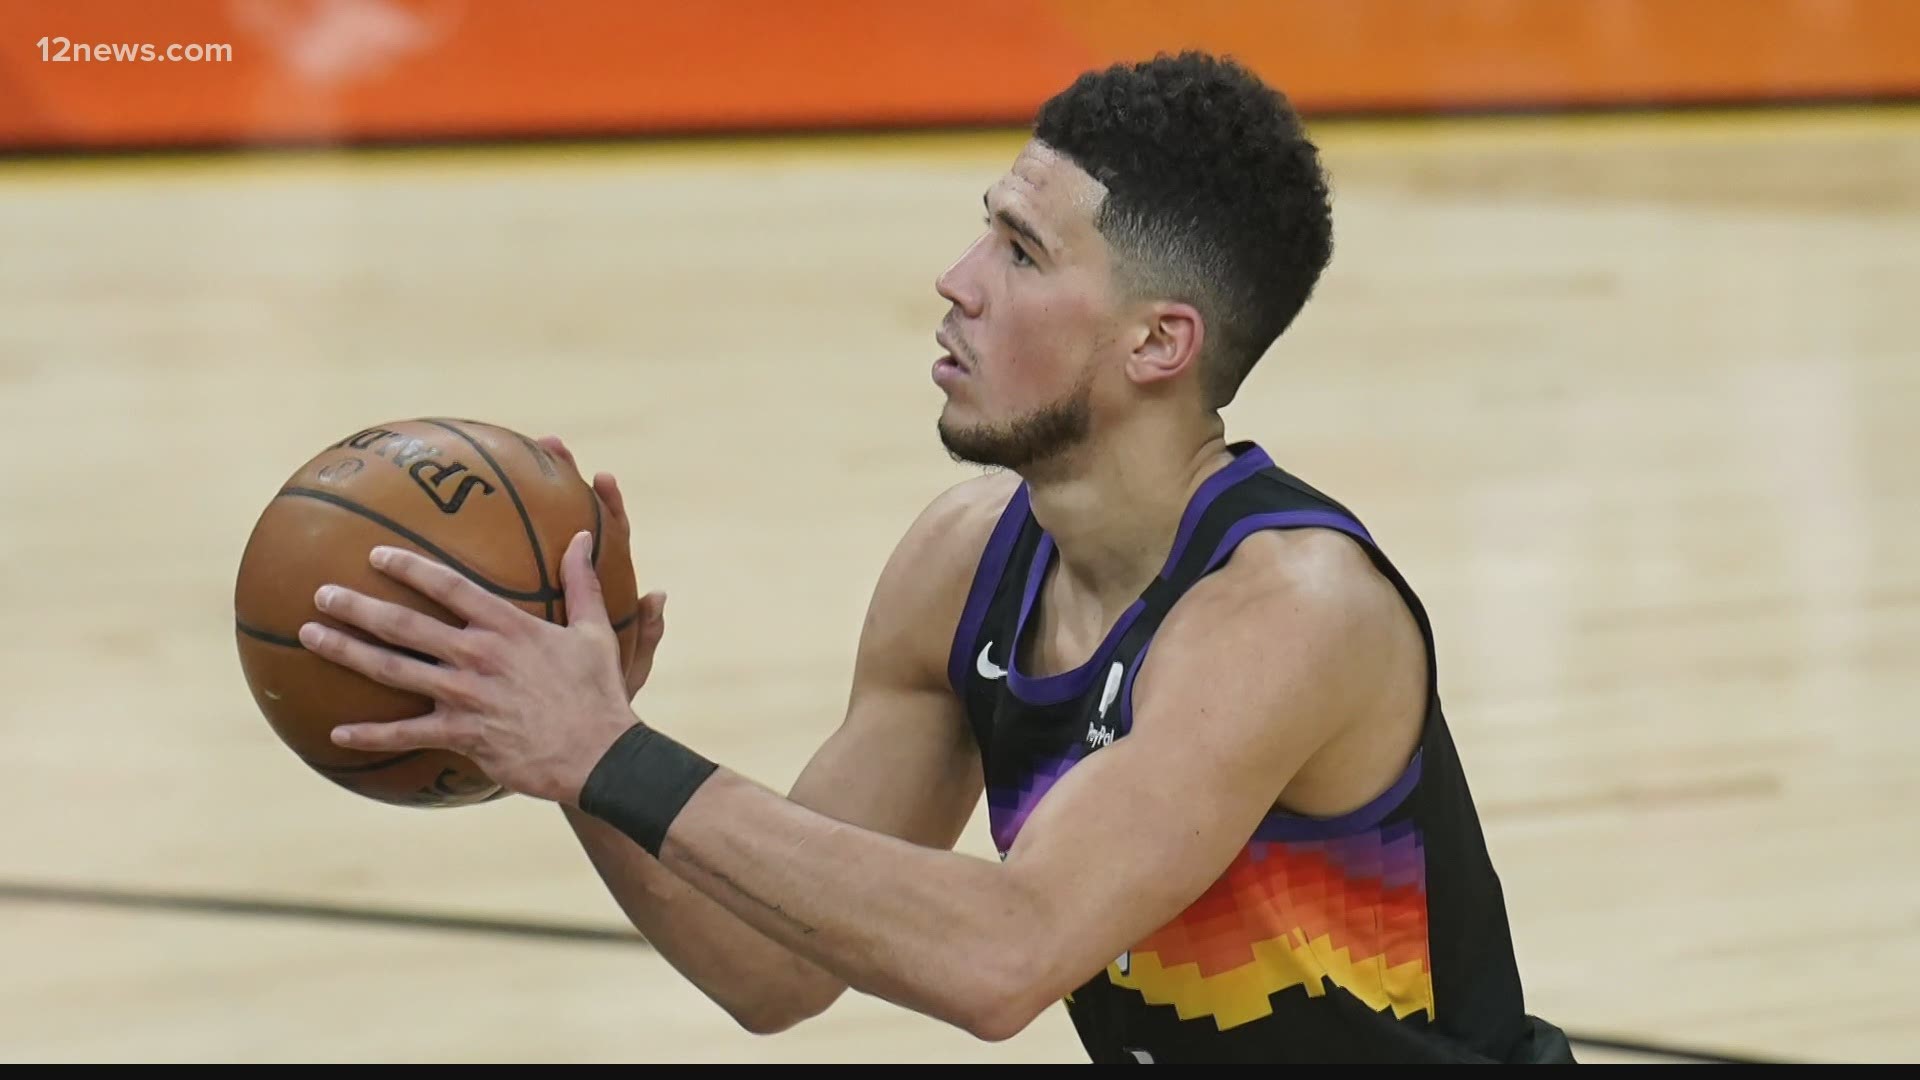 Devin Booker is one of only two active NBA players with Mexican roots. His connection to the Latino community is resonating with many across the Valley.